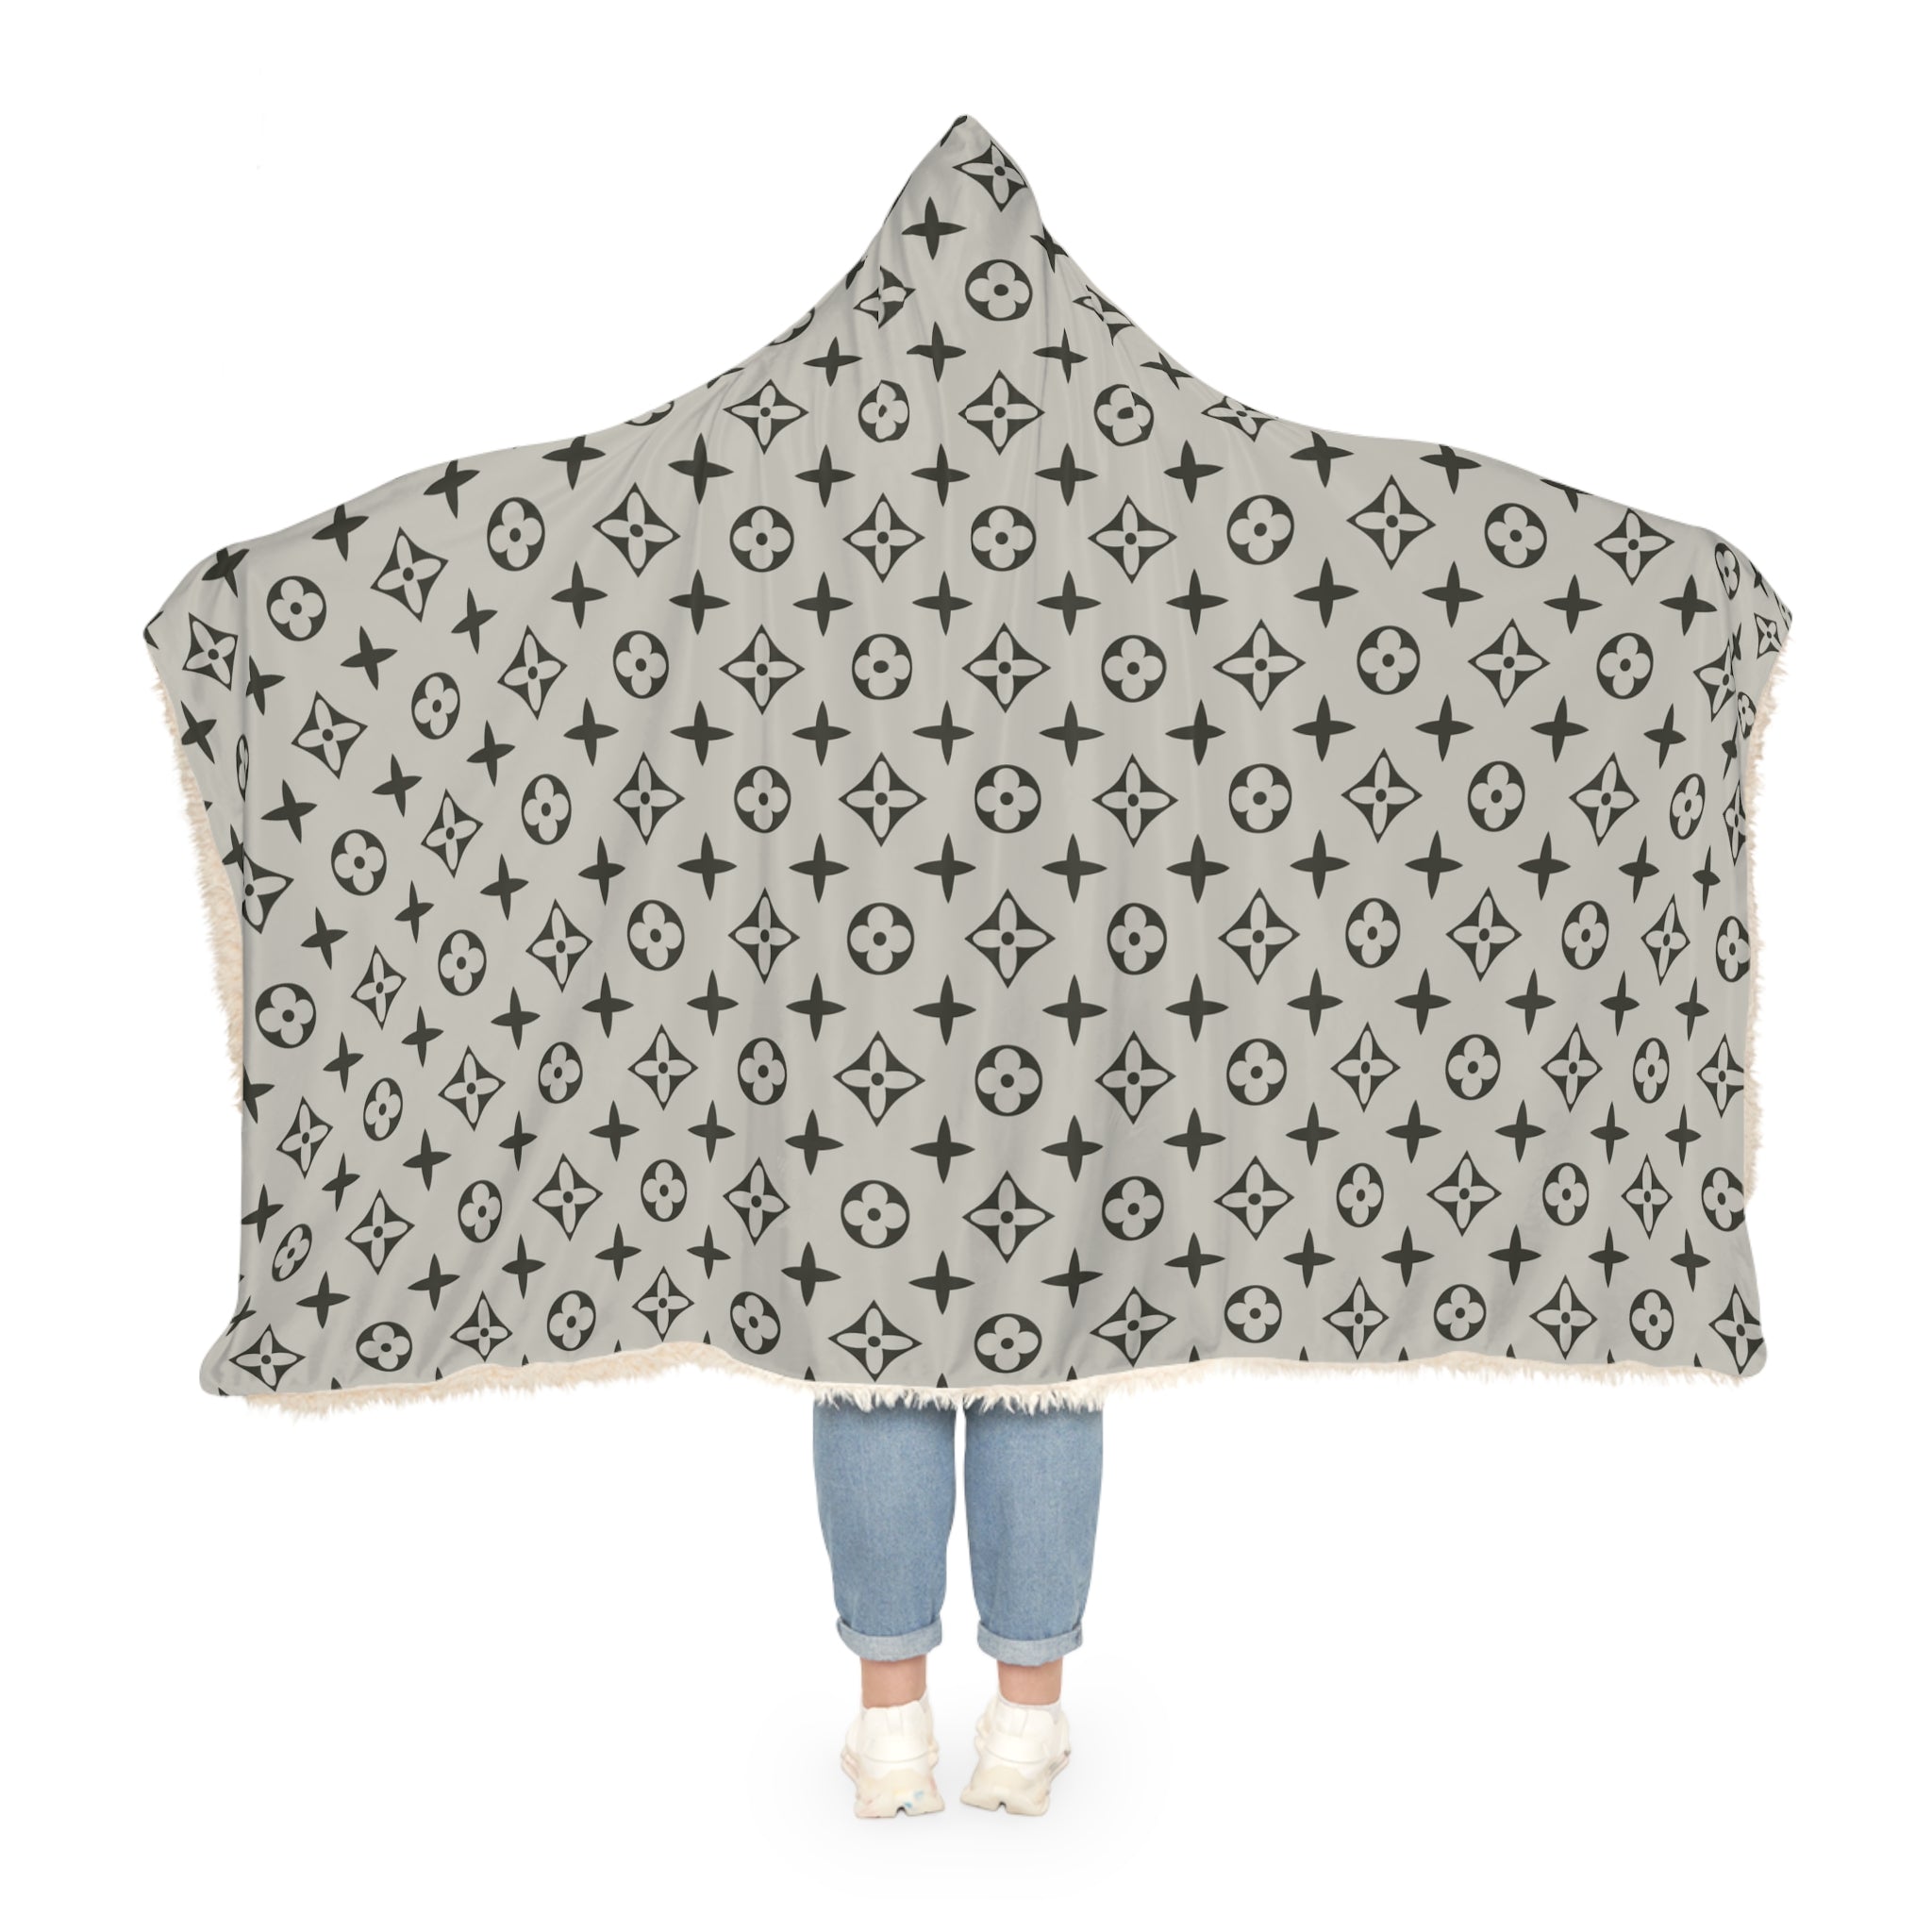 At Home Collection Large Grey Icon Snuggle Blanket, Hooded Sherpa, Oversized Hooded Cape All Over Prints  The Middle Aged Groove